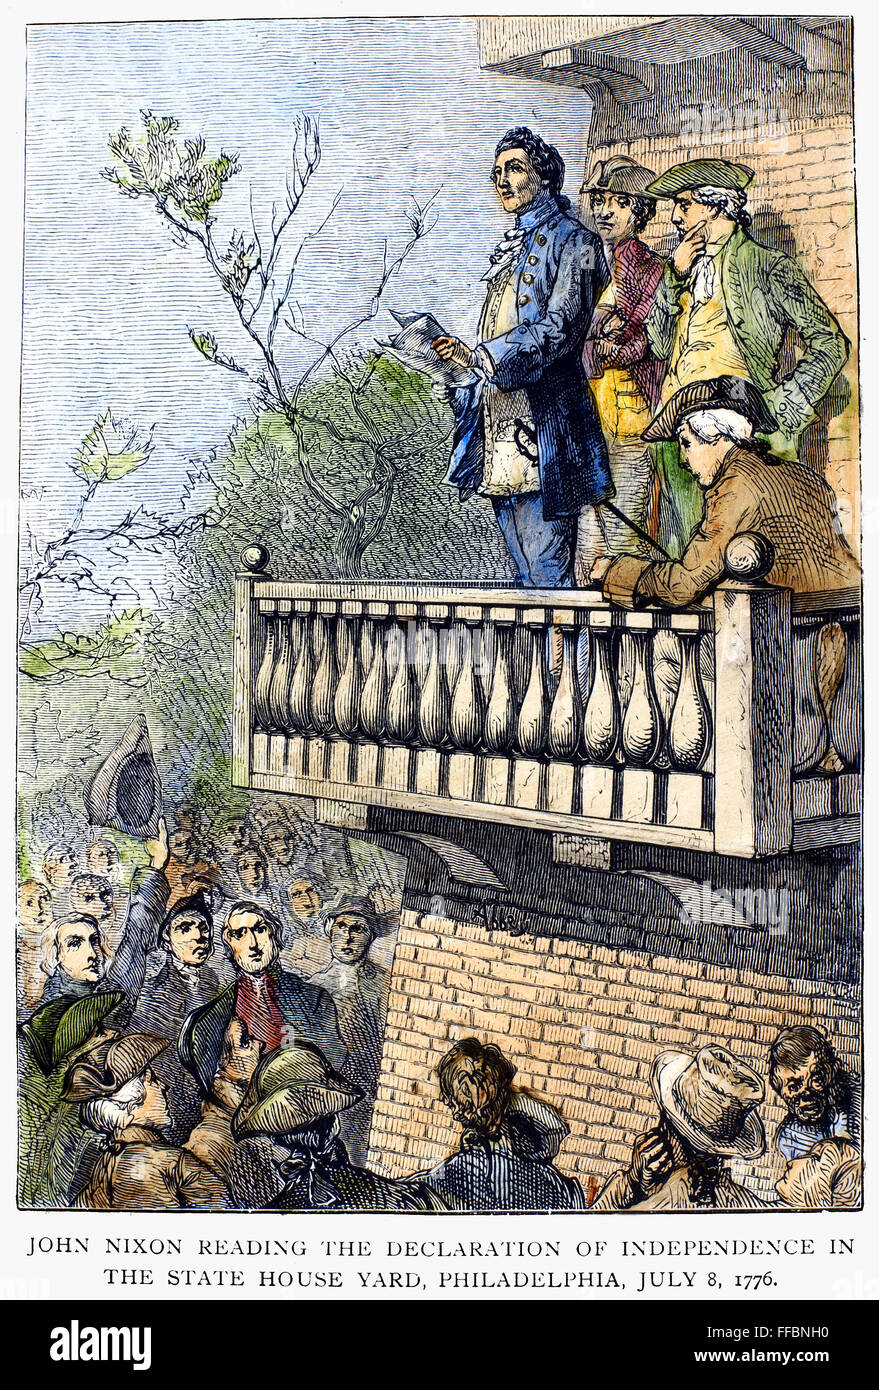 JOHN NIXON, 1776. /nJohn Nixon giving the first public reading of the Declaration of Independence in the State House Yard, Philadelphia, Pennsylvania, on 8 July 1776. Wood engraving, 19th century. Stock Photo